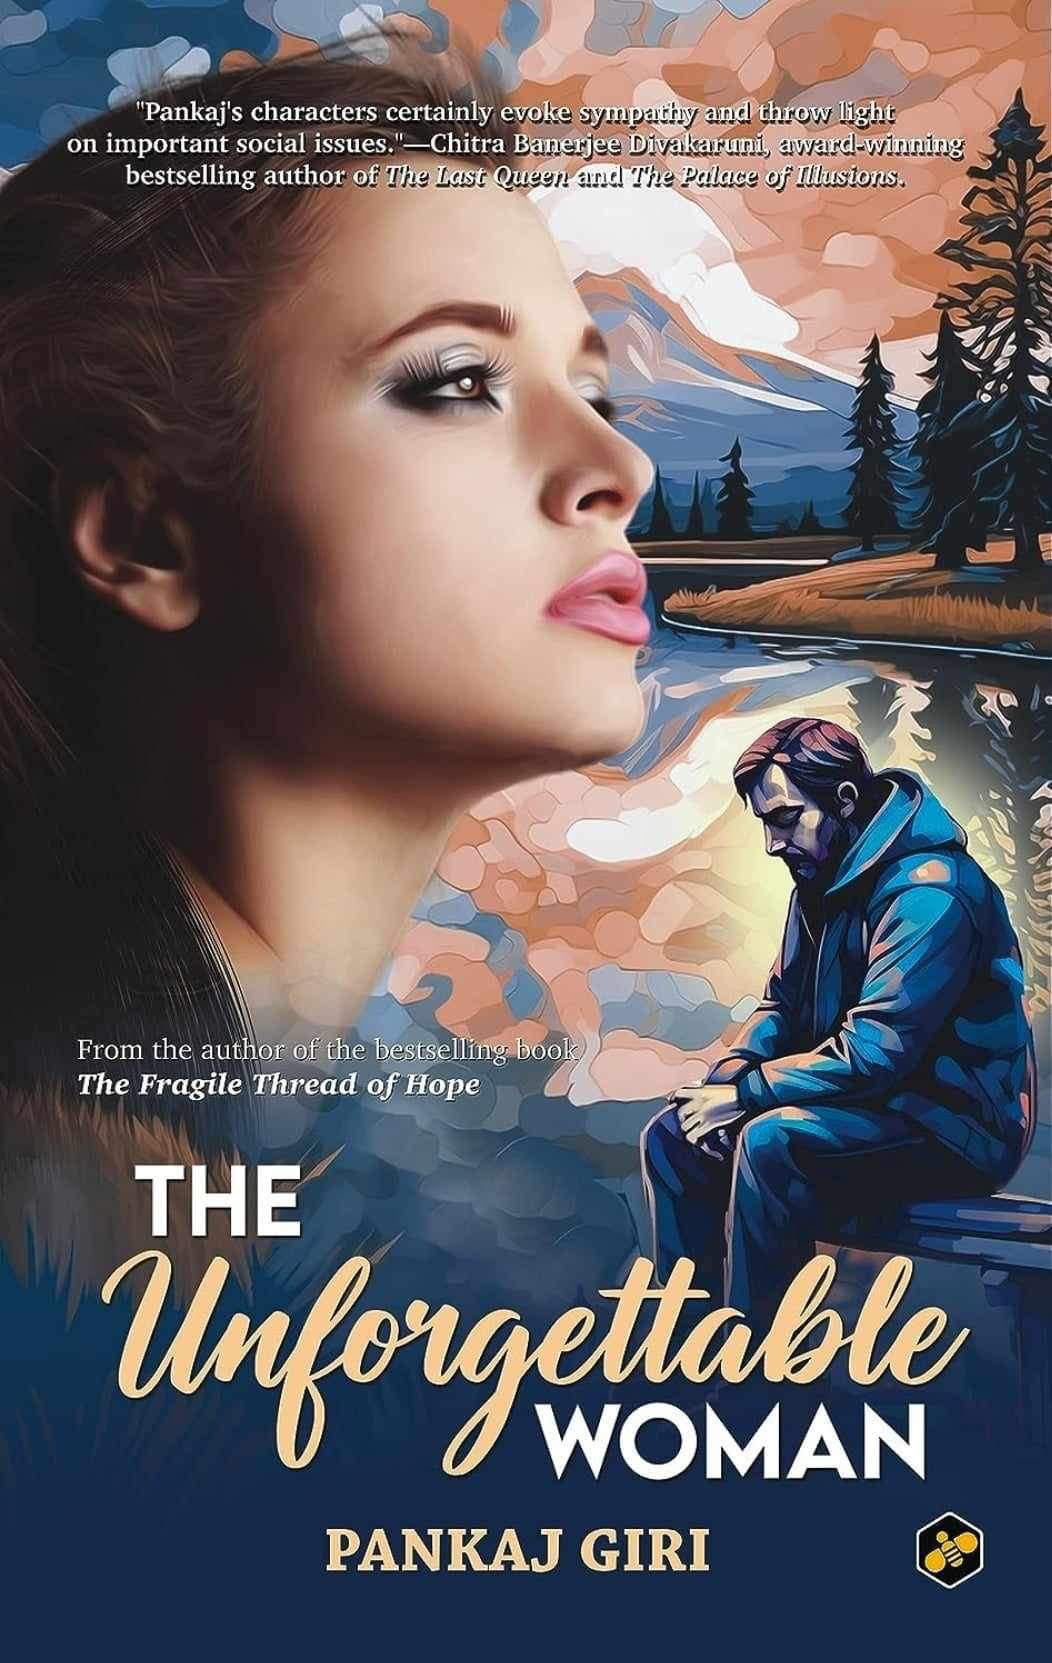 The Unforgettable Woman – An intriguing tale of characters and relationships